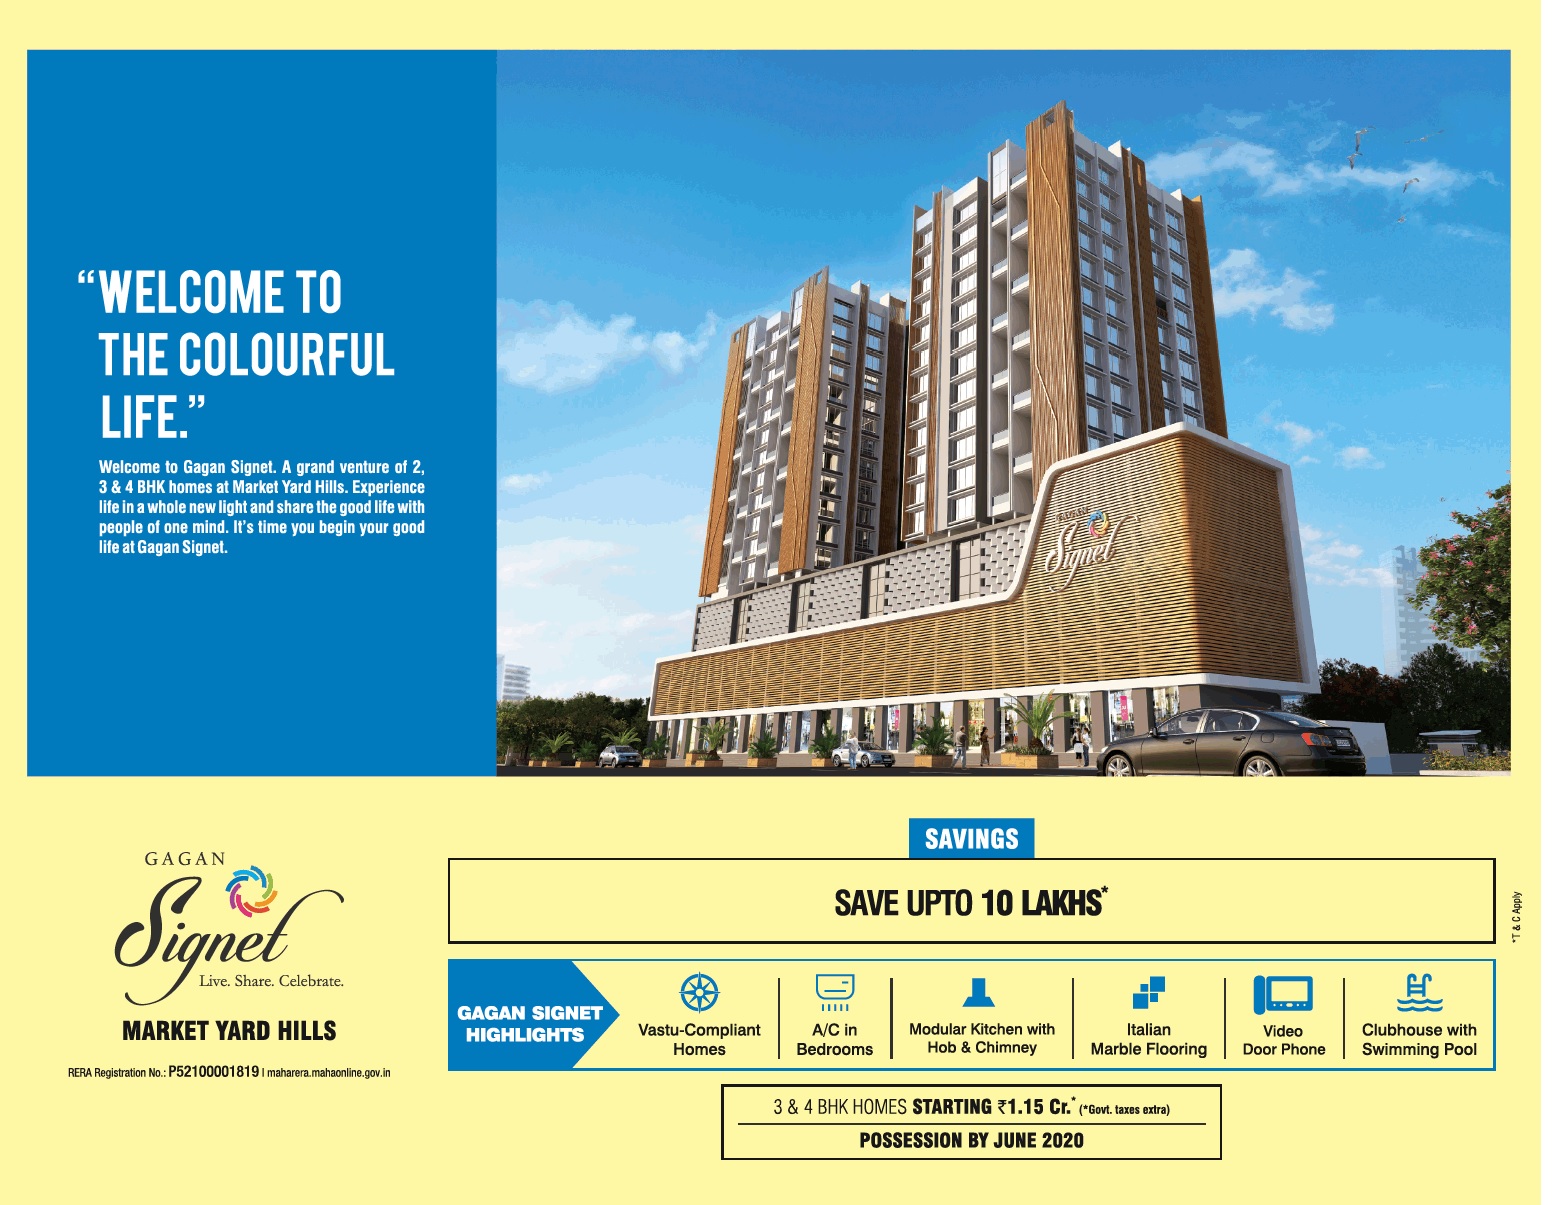 Book 3 & 4 bhk homes starting at Rs. 1.15 Cr. at Gagan Signet in Pune Update